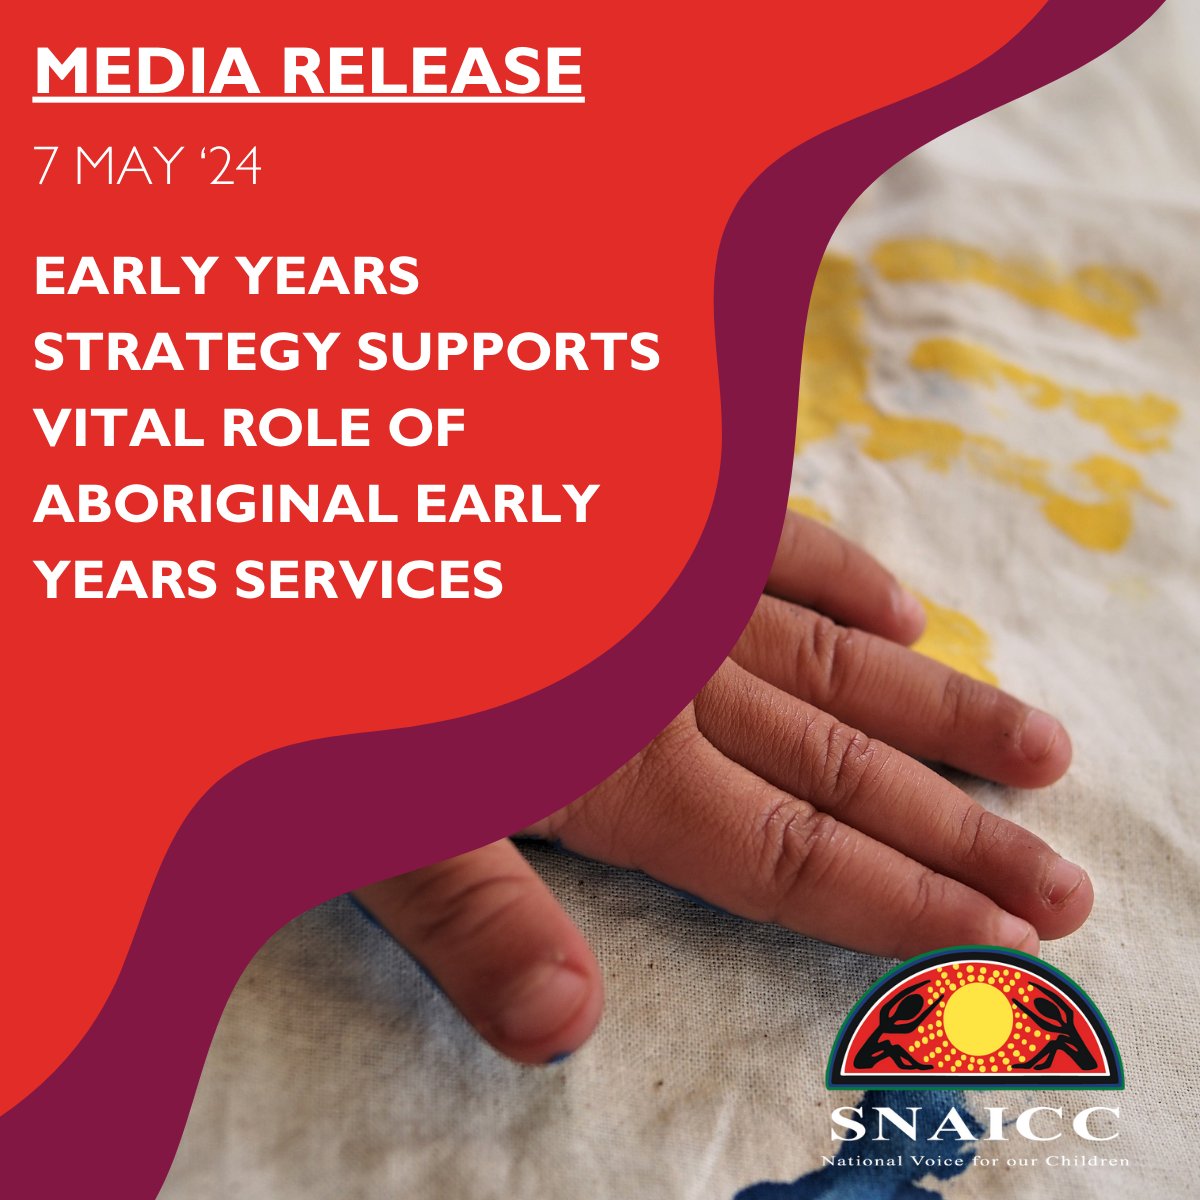 SNAICC Media Release 🗞 Early Years Supports vital role of Aboriginal early years services Read full release here: snaicc.org.au/early-years-st…